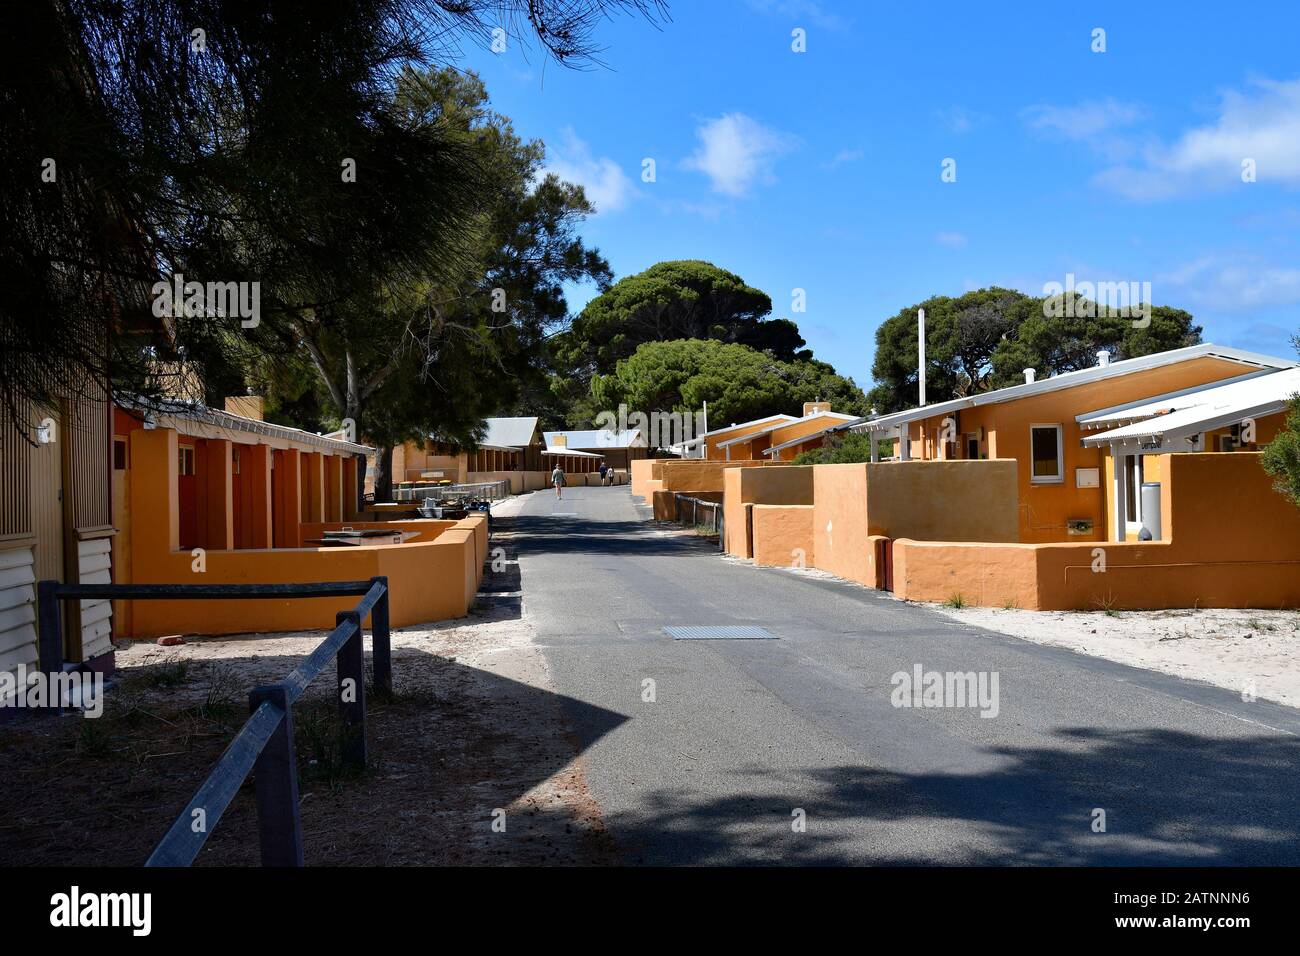 Perth, WA, Australia - November 27, 2017: Unidentified people and homes in the tiny settlement on Rottnest Island Stock Photo